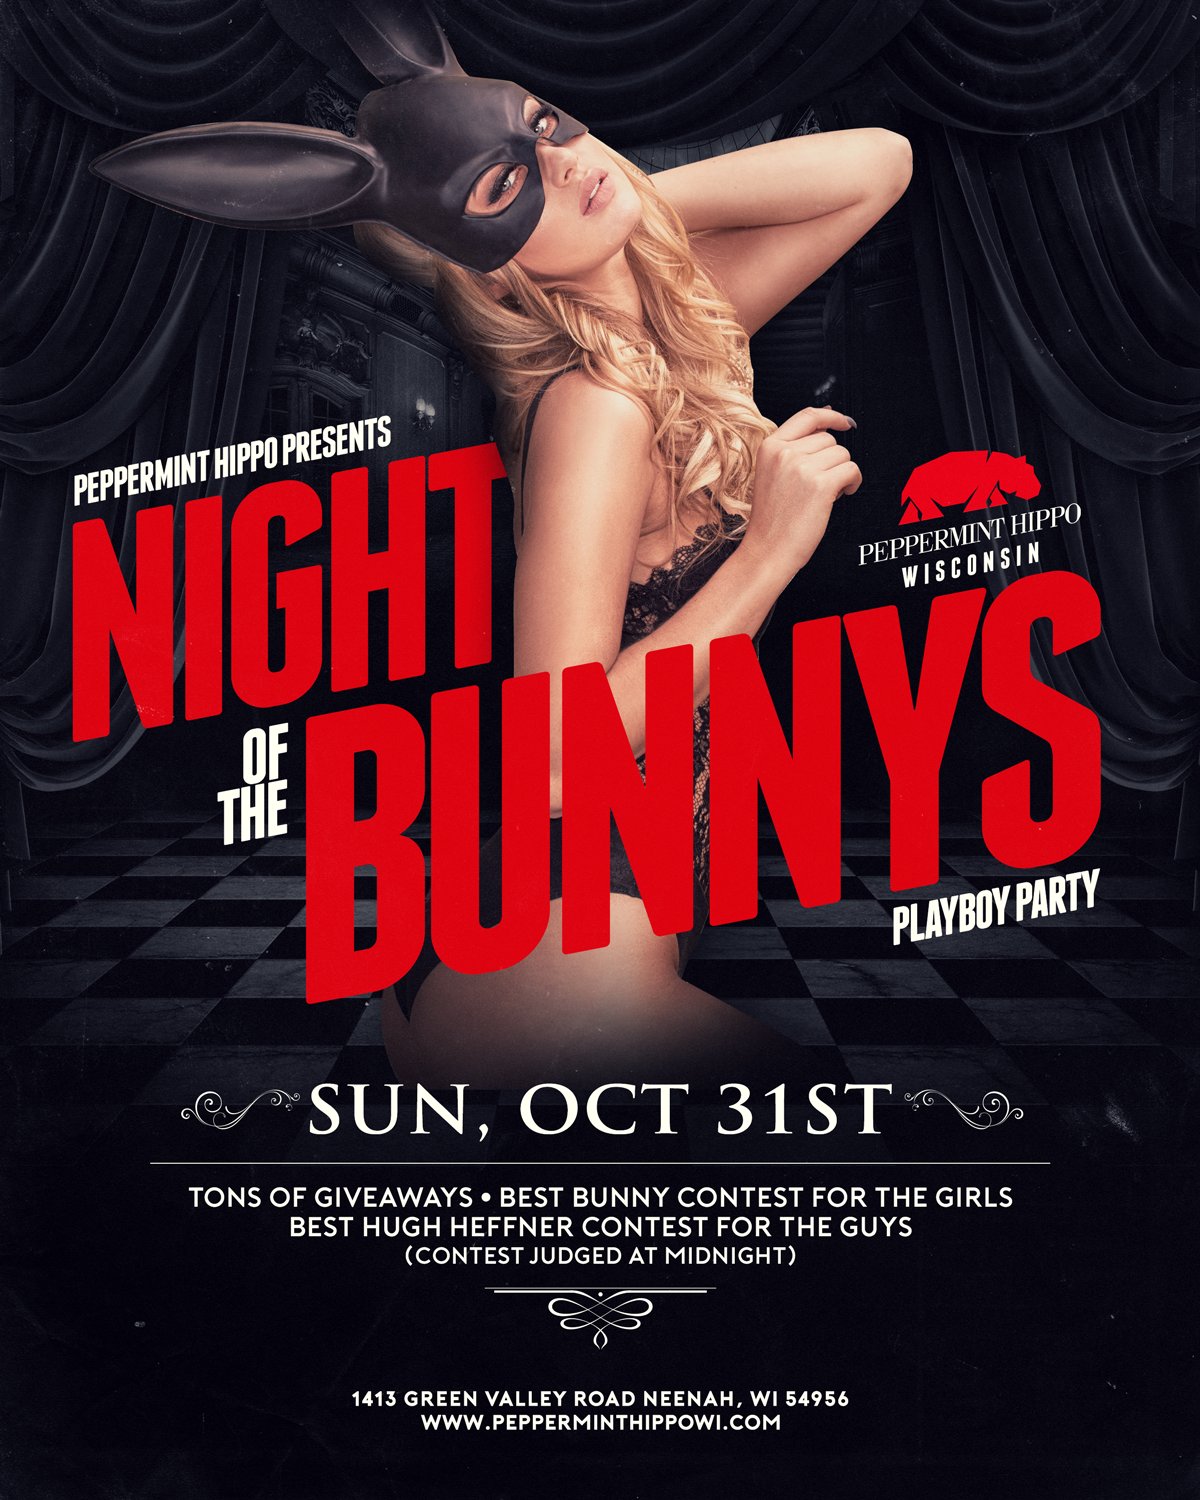 Night of the Bunnys Playboy Party